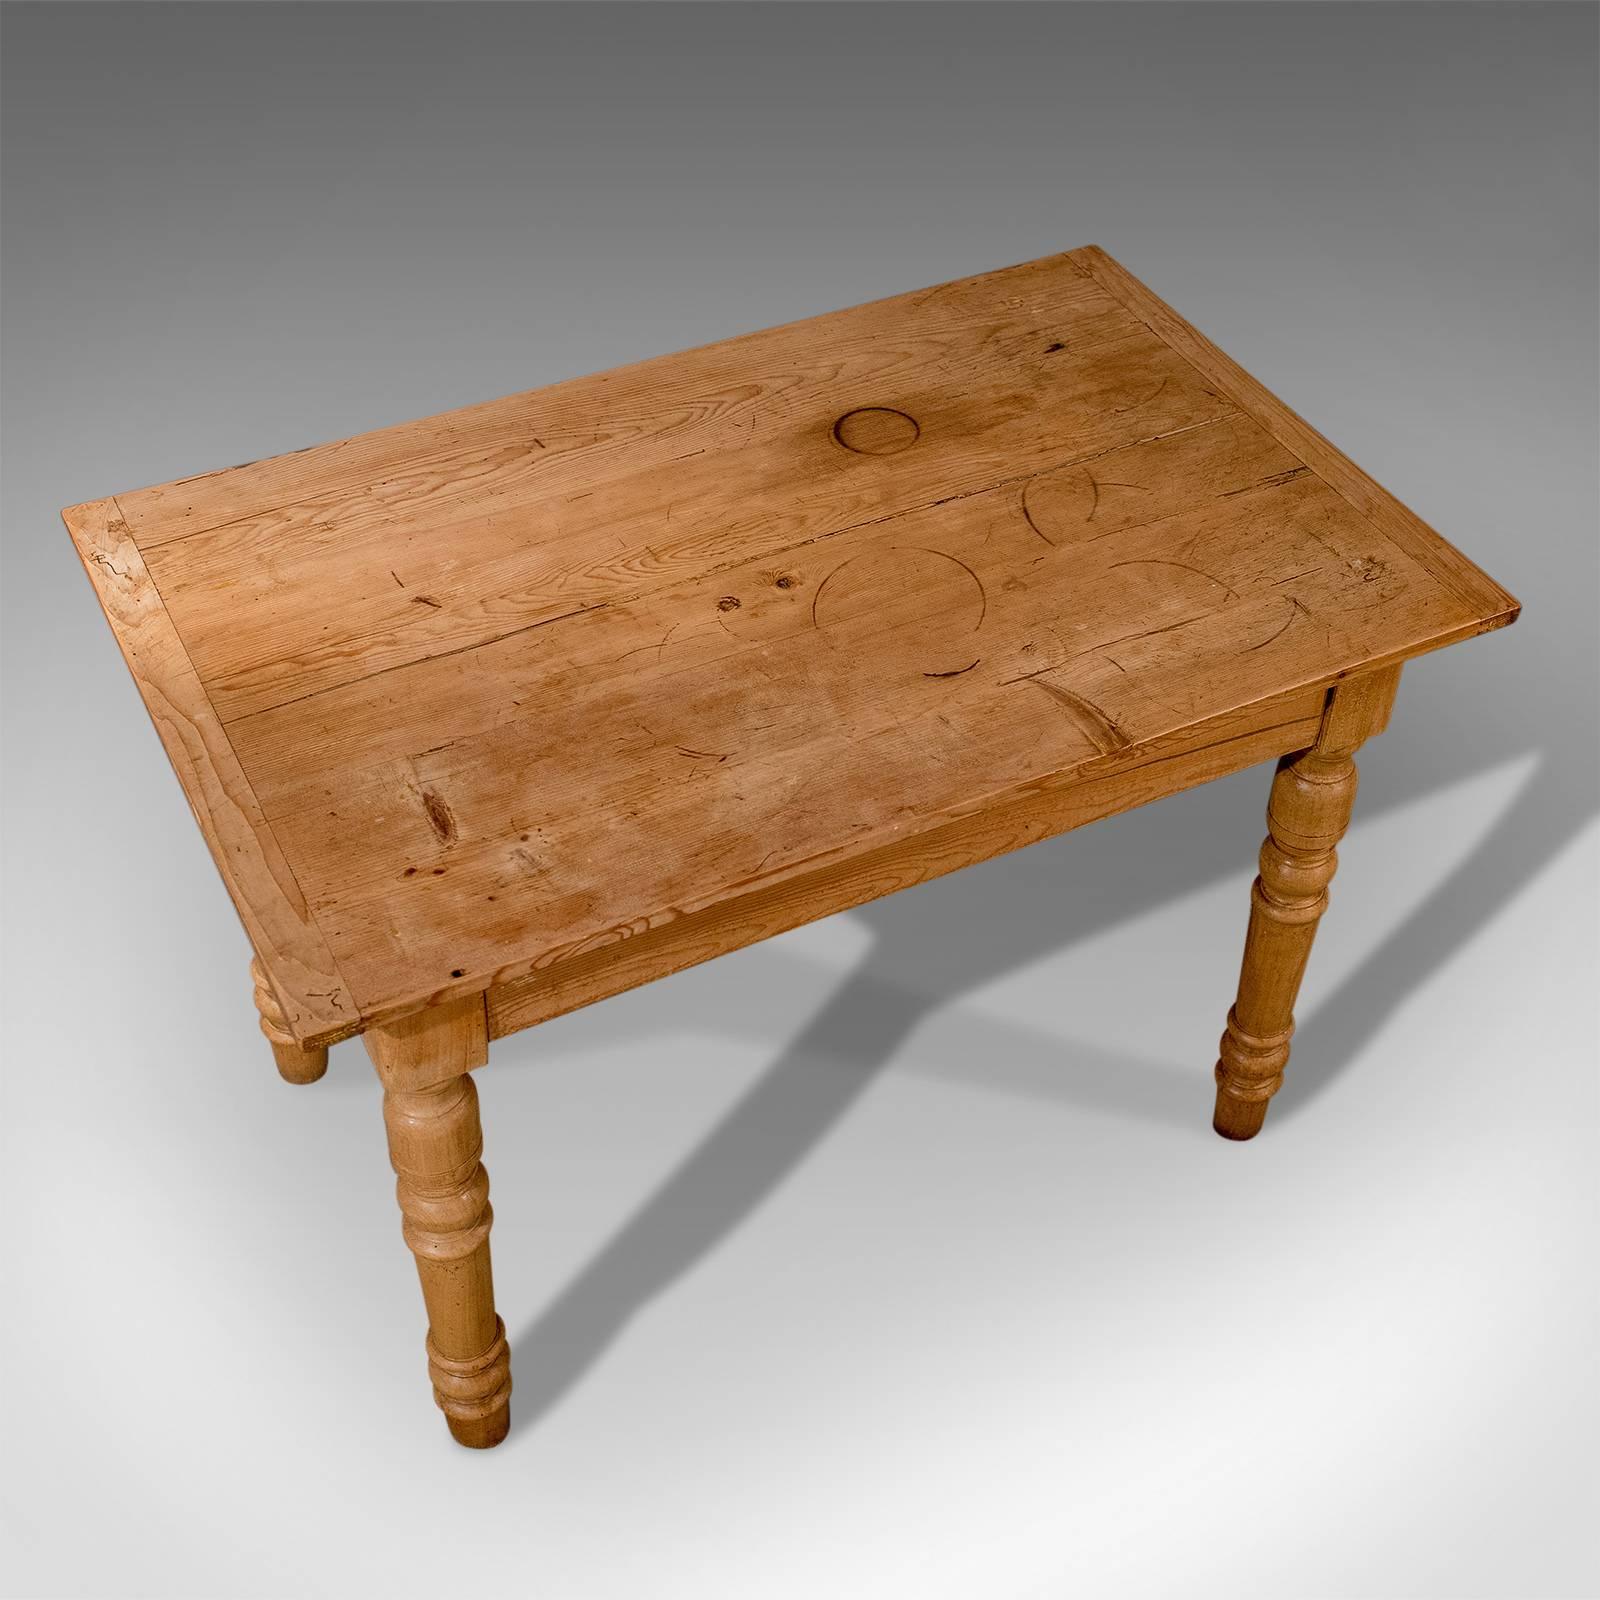 20th Century Victorian Pine Kitchen Dining Country Table with Storage under Top, circa 1900